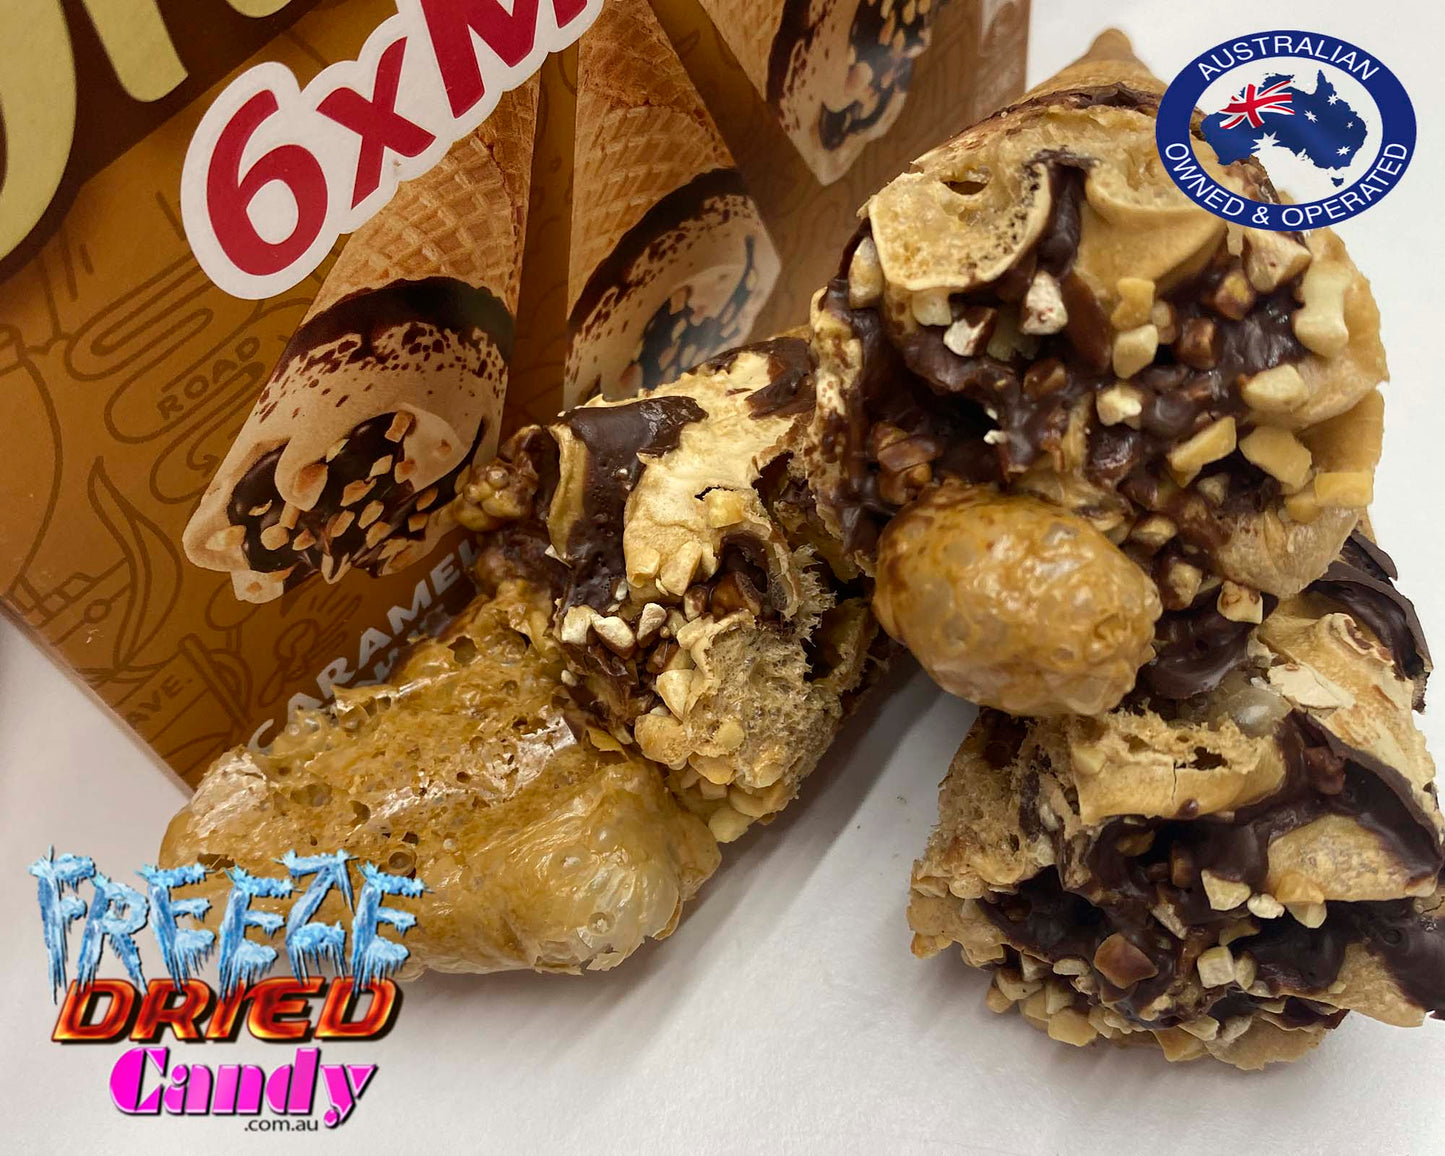  Freeze Dried  Ice Cream Drumstick Mini  - Caramel Nut - Peters  Drumstick Mini's Caramel Nut is a delicious crispy wafer cone with filled with Caramel Flavored ice cream topped with caramel syrup and nuts.  Its ready-to-eat, crispy, light, and extremely tasty.